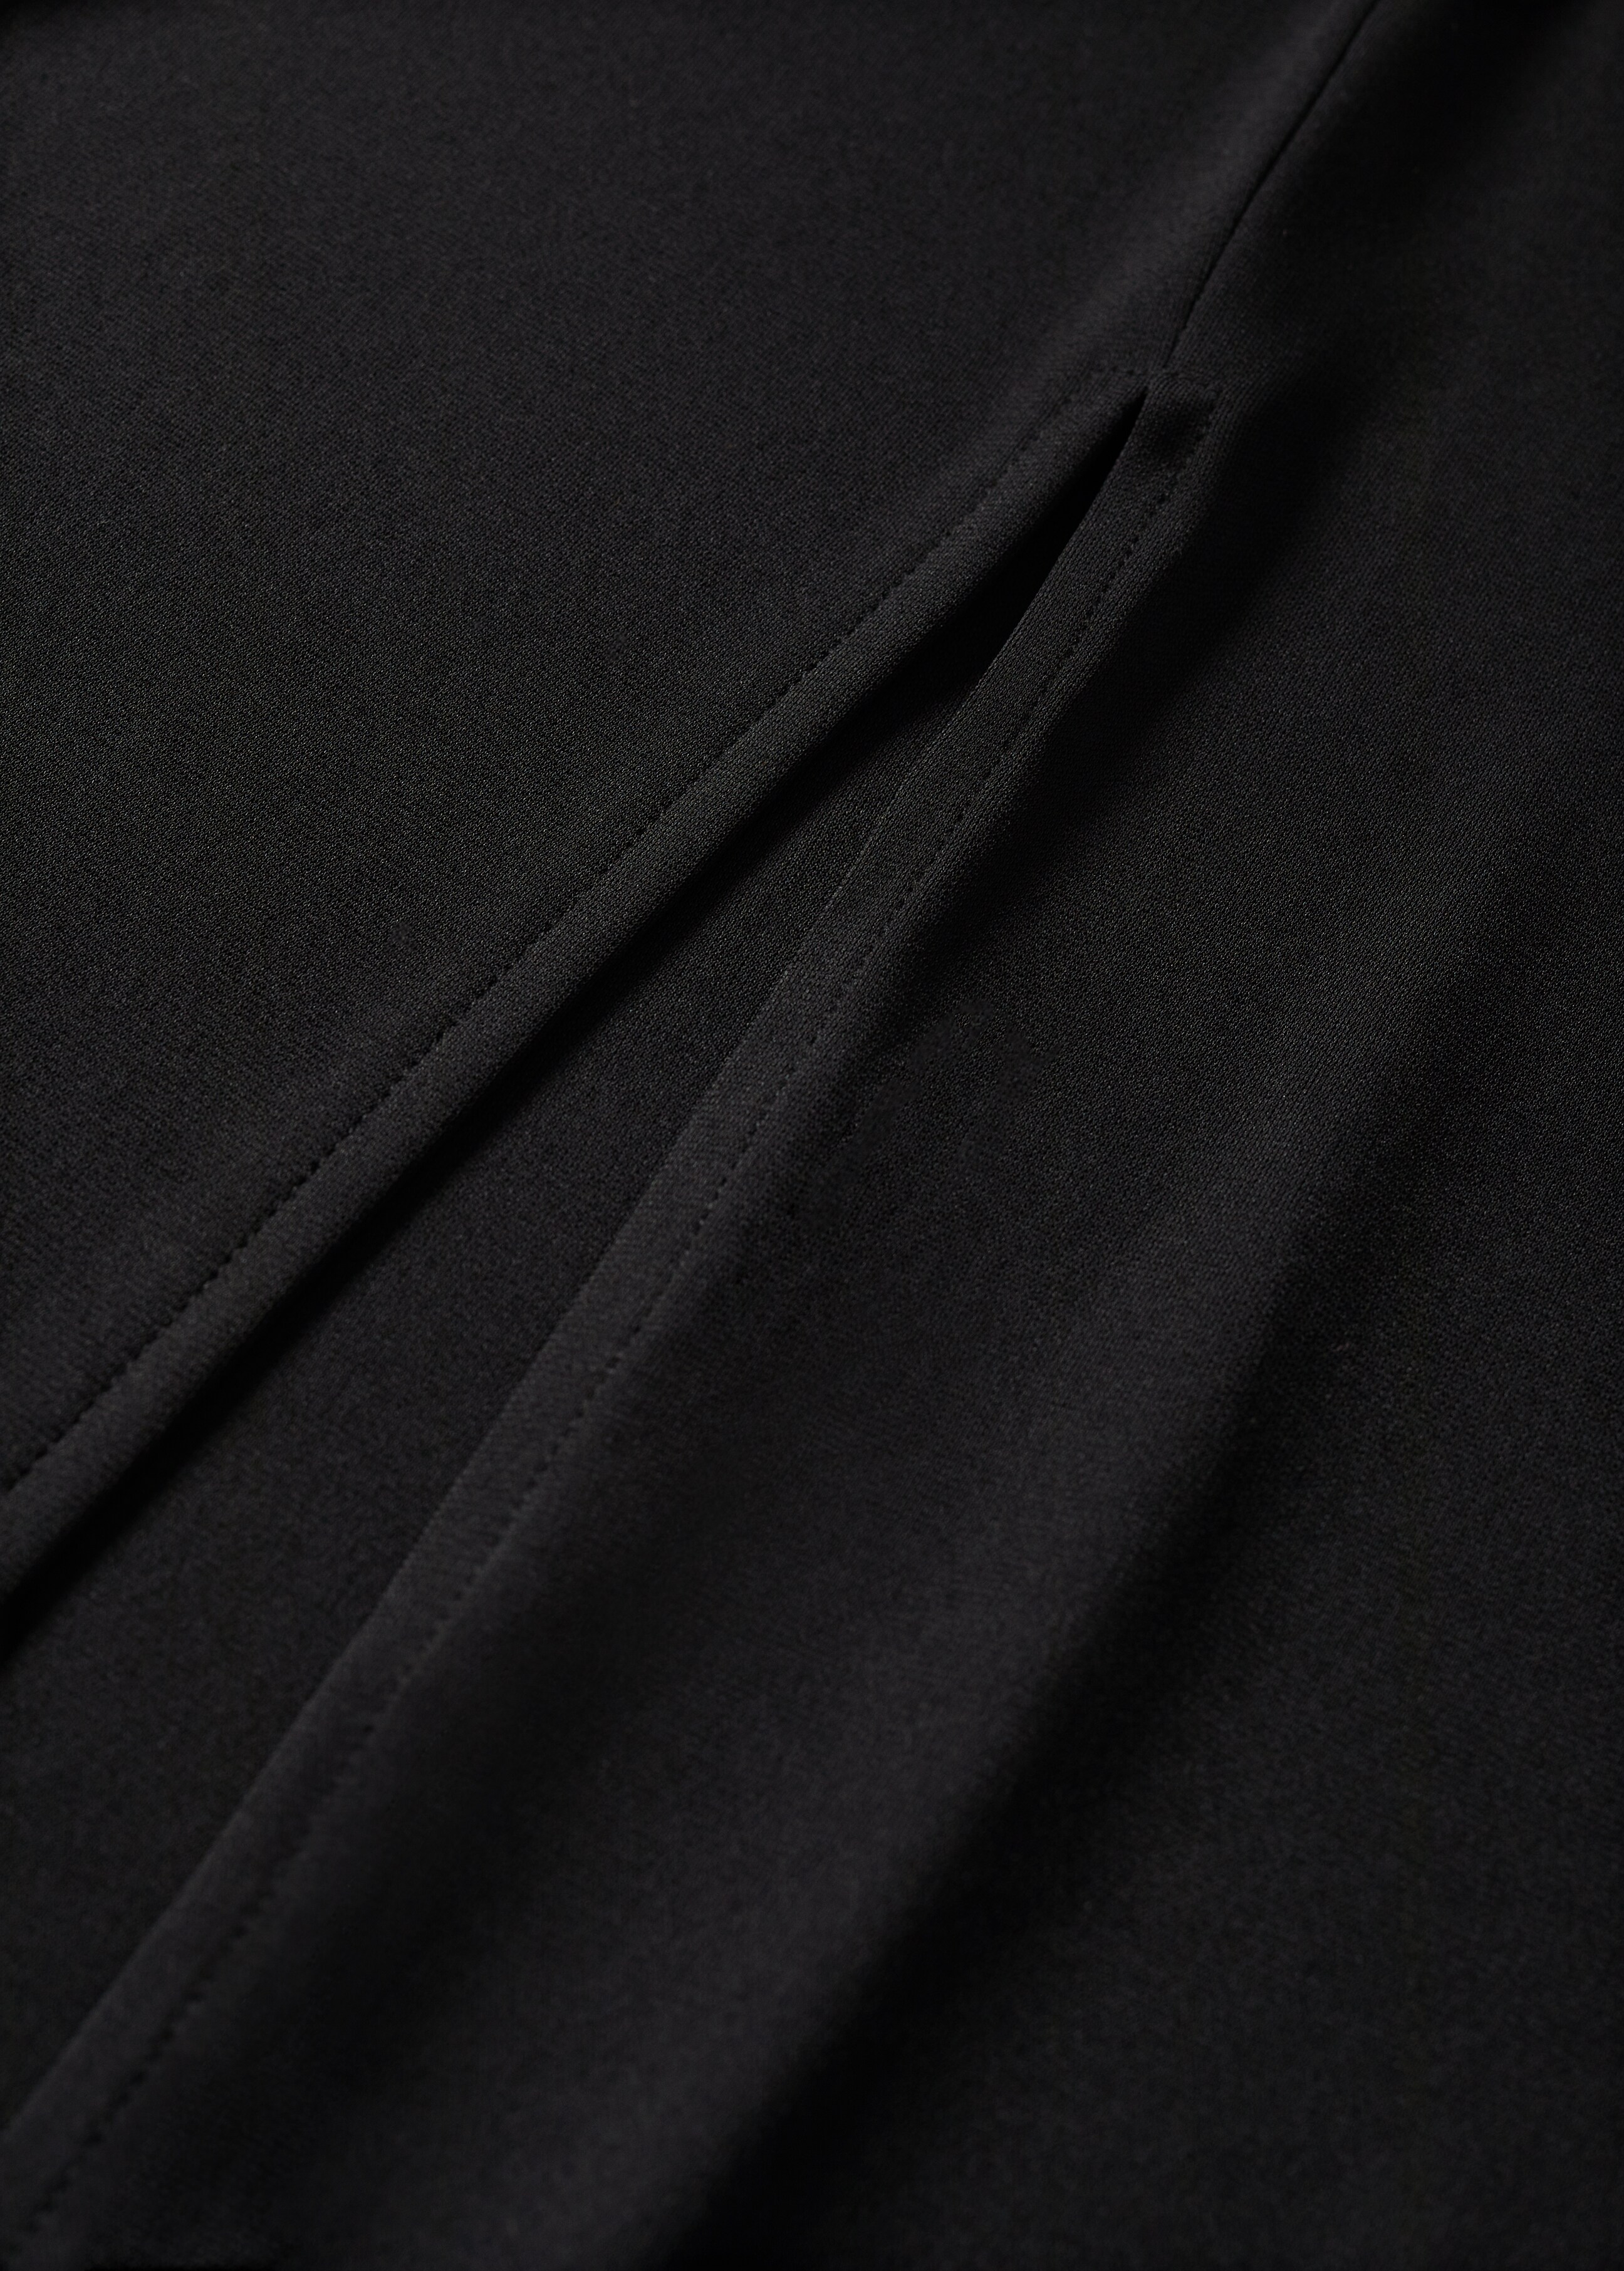 Ruched detail skirt - Details of the article 8